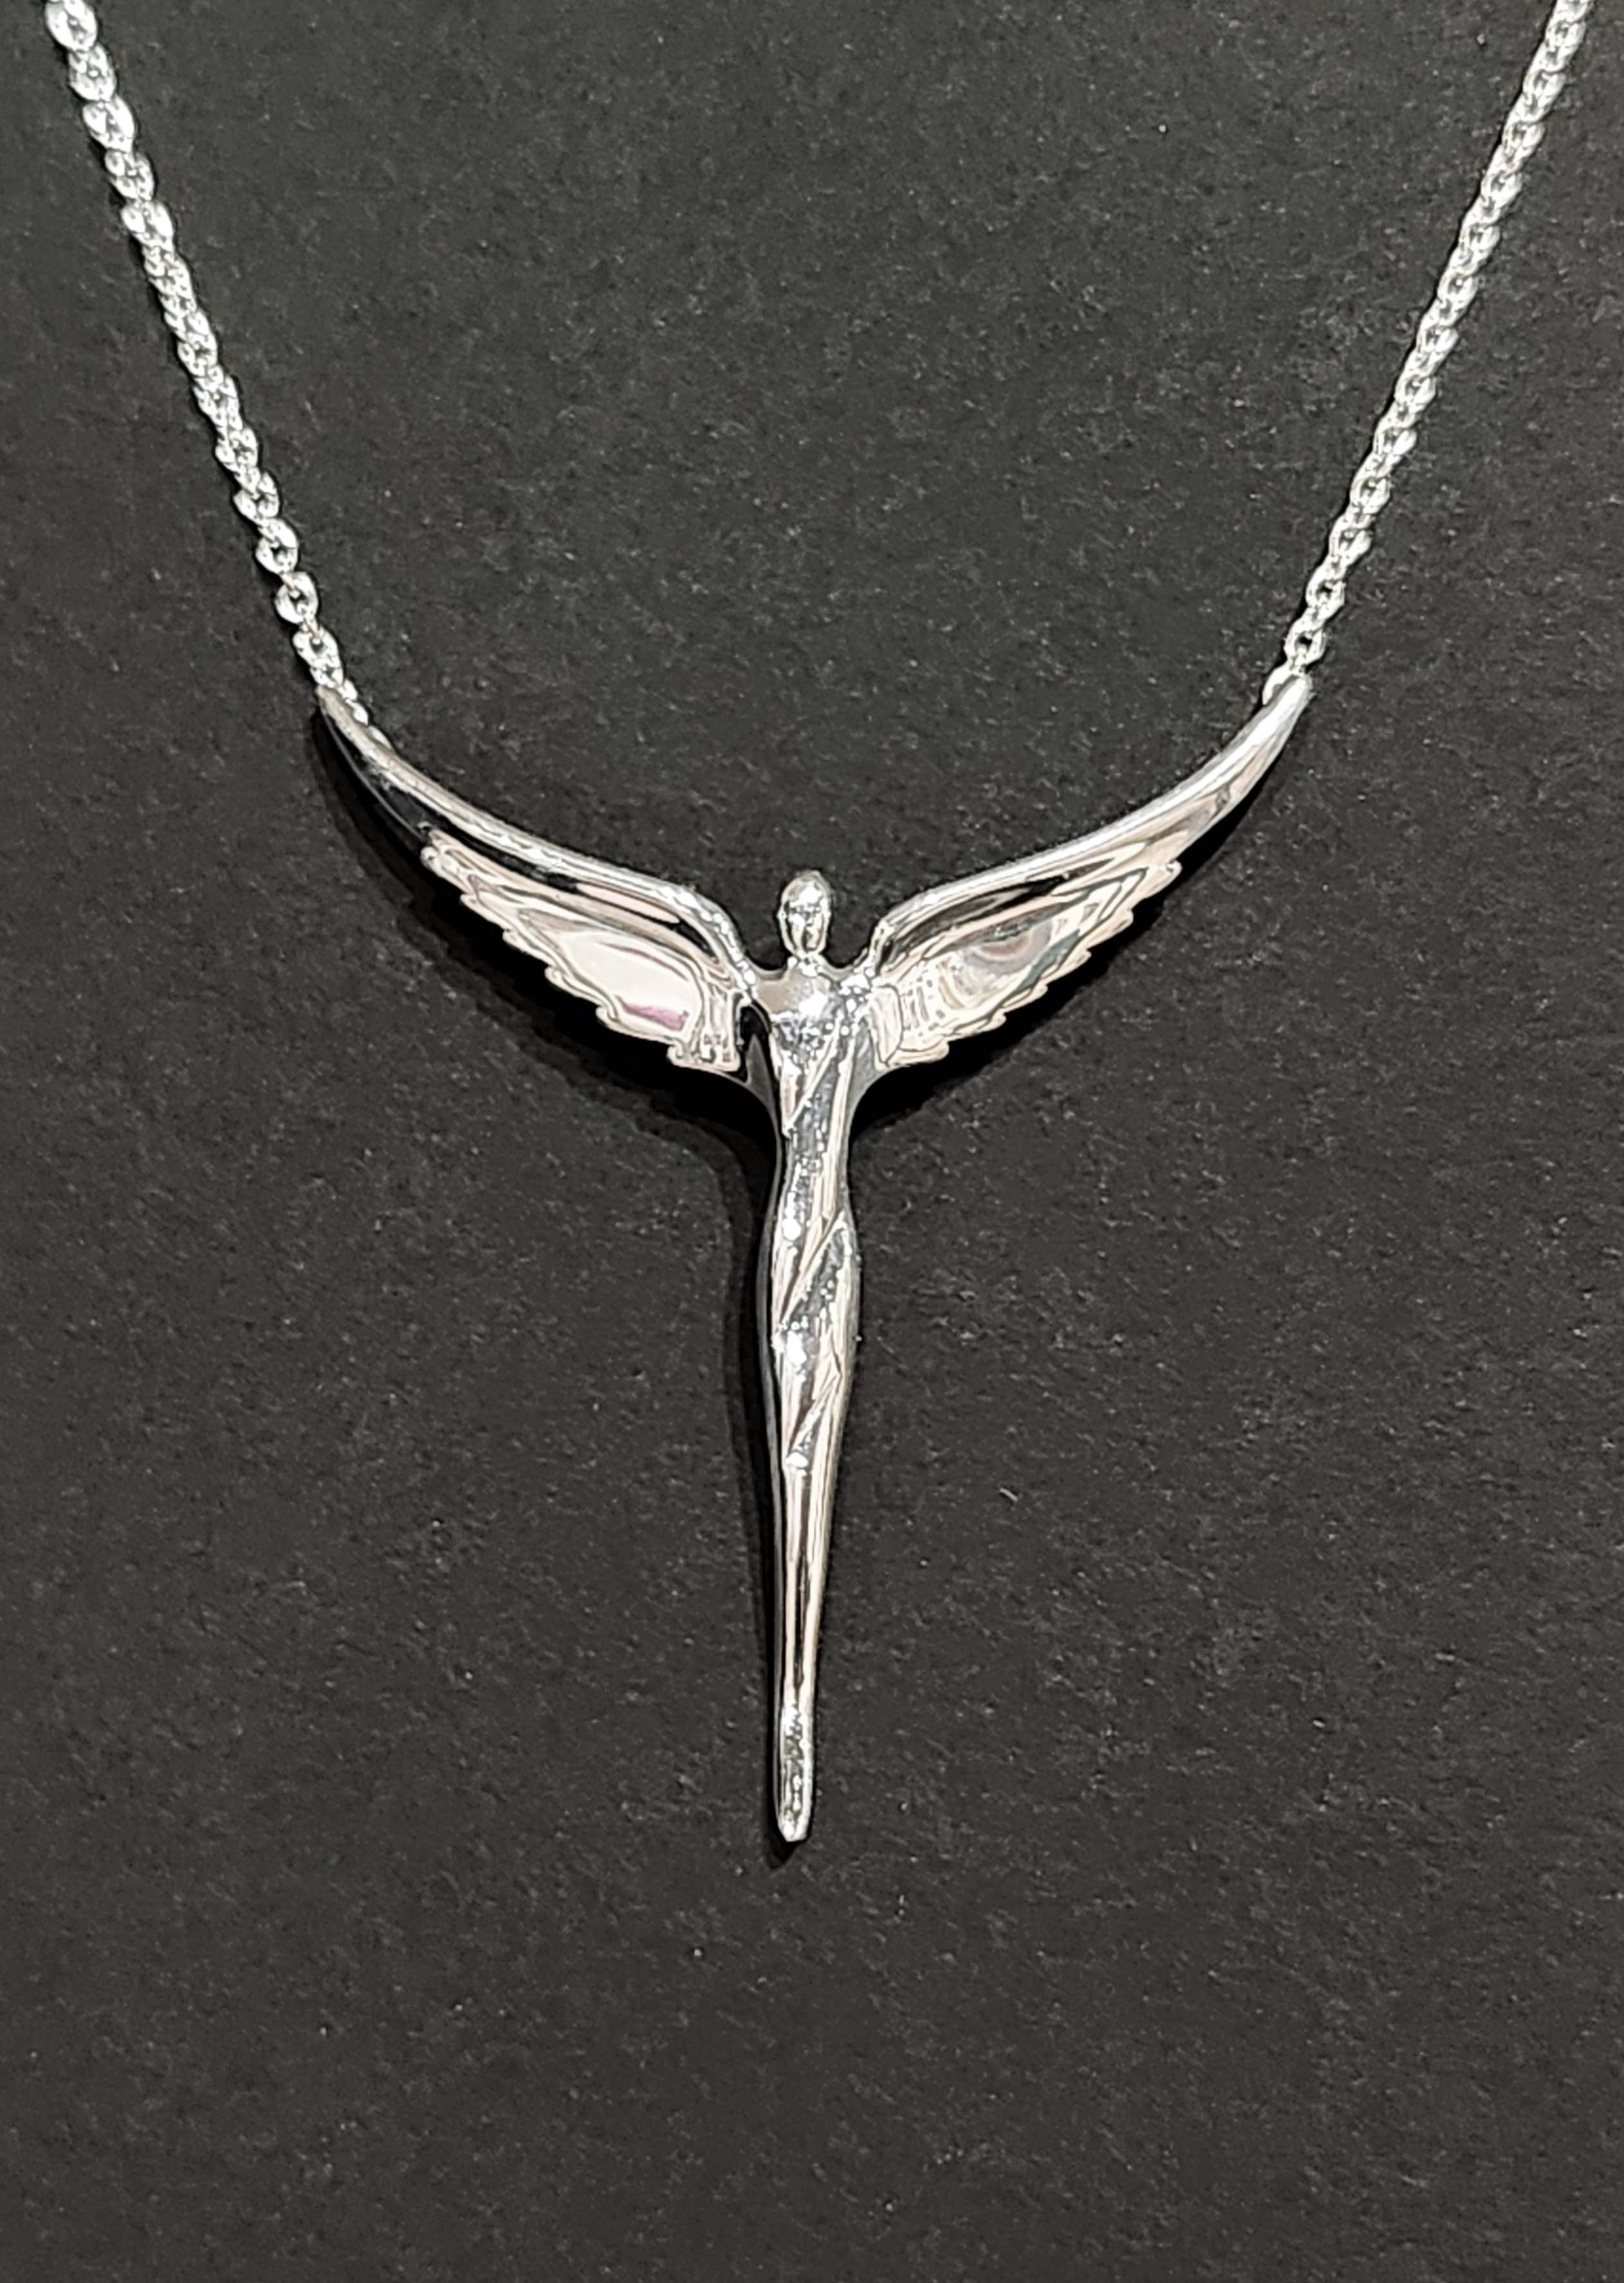 Angel of Reconciliation - Necklace